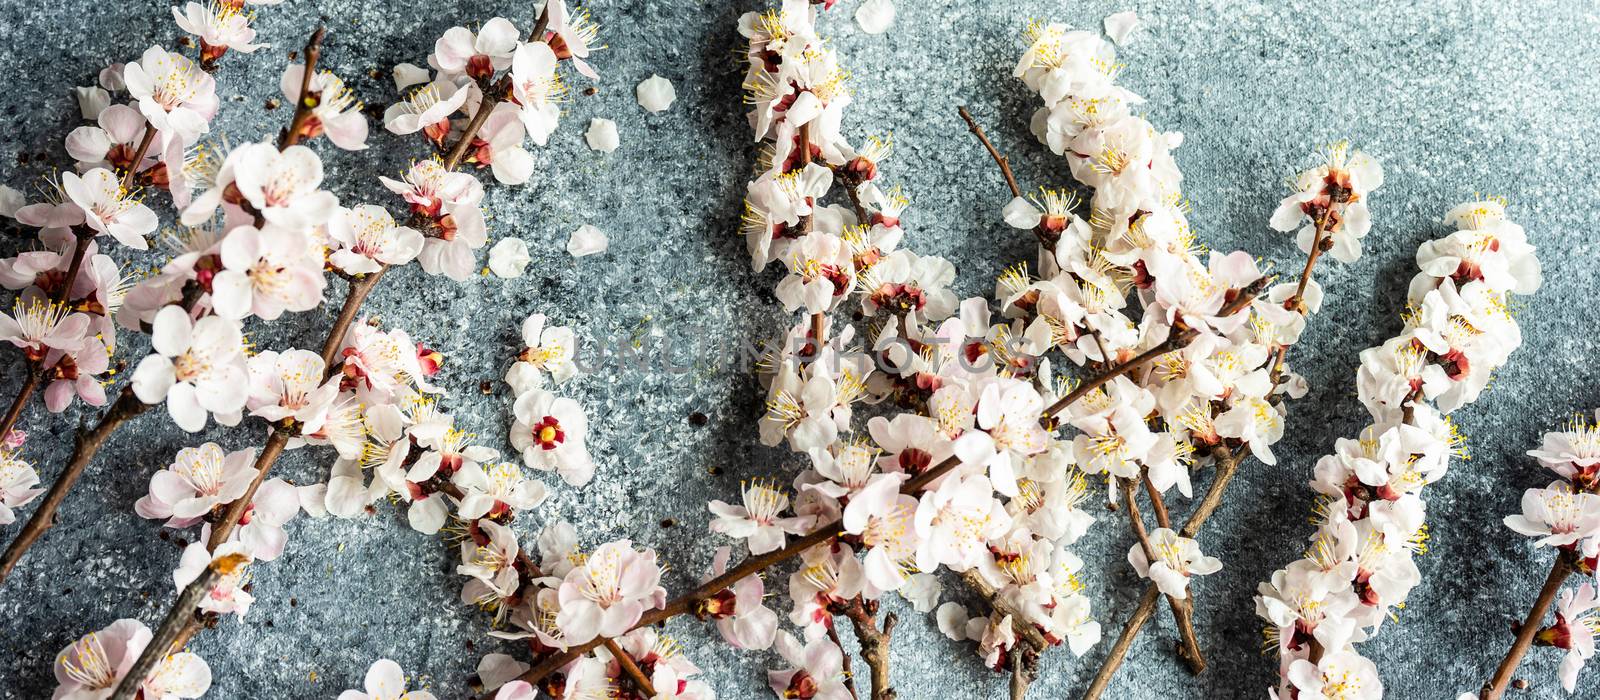 Spring floral concept with apricot blossom by Elet